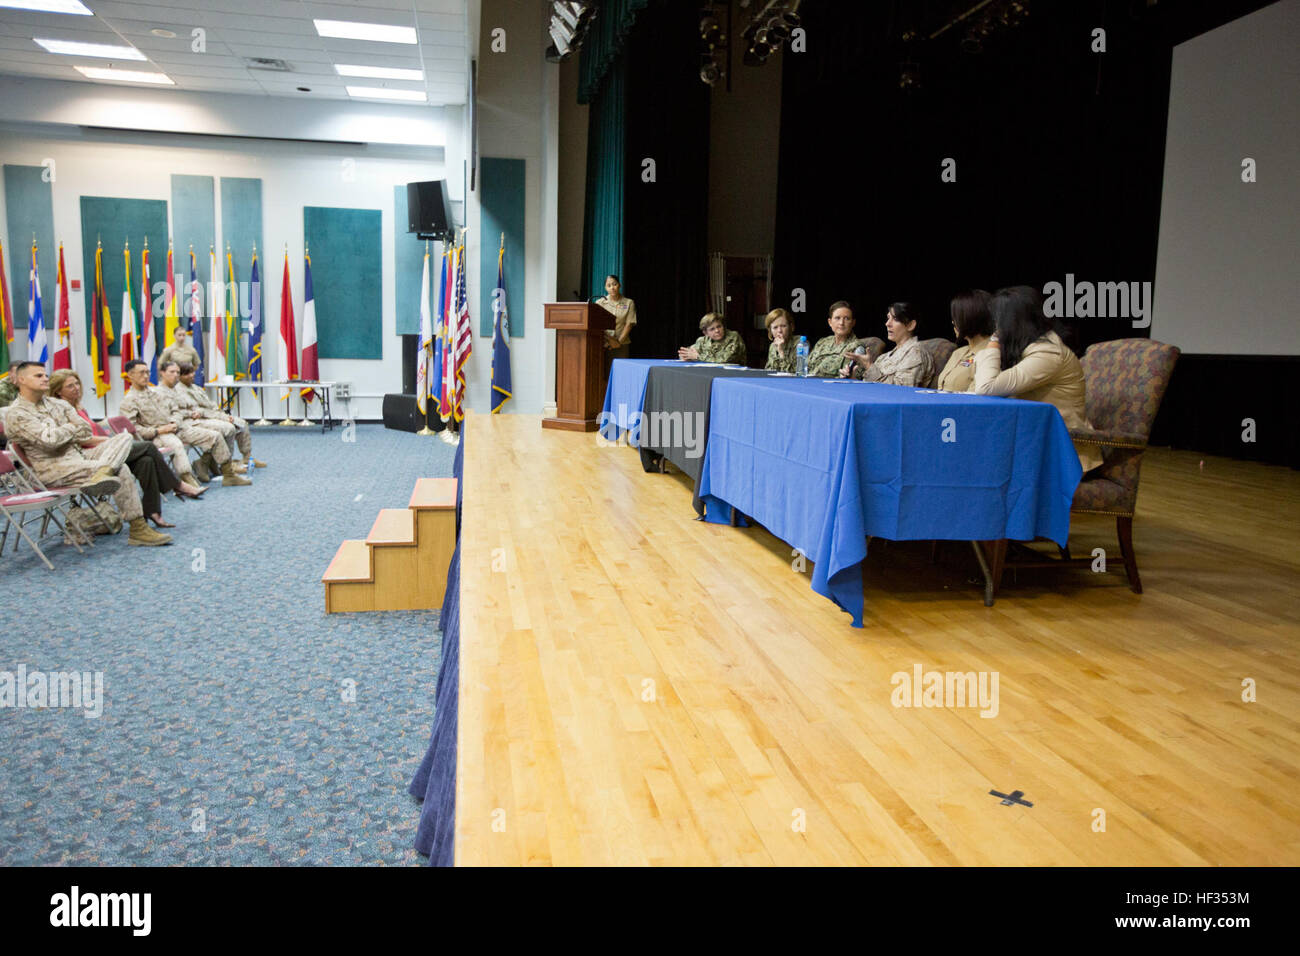 U.S. Marine Corps Lt. Col. Marta Moellendick, assistant chief of staff for administration, Command Element Marine Forces Central Command Forward, speaks at the 2015 Women's History Symposium aboard Naval Support Activity Bahrain, March 26, 2015. The symposium was held to discuss the role and achievements of women in the military and U.S. Department of State. (U.S. Marine Corps photo by Cpl. Sean Searfus CE MARFOR CENTCOM FWD COMCAM / Released) CE MARFOR CENTCOM FWD Women's History Symposium 150326-M-VH365-058 Stock Photo